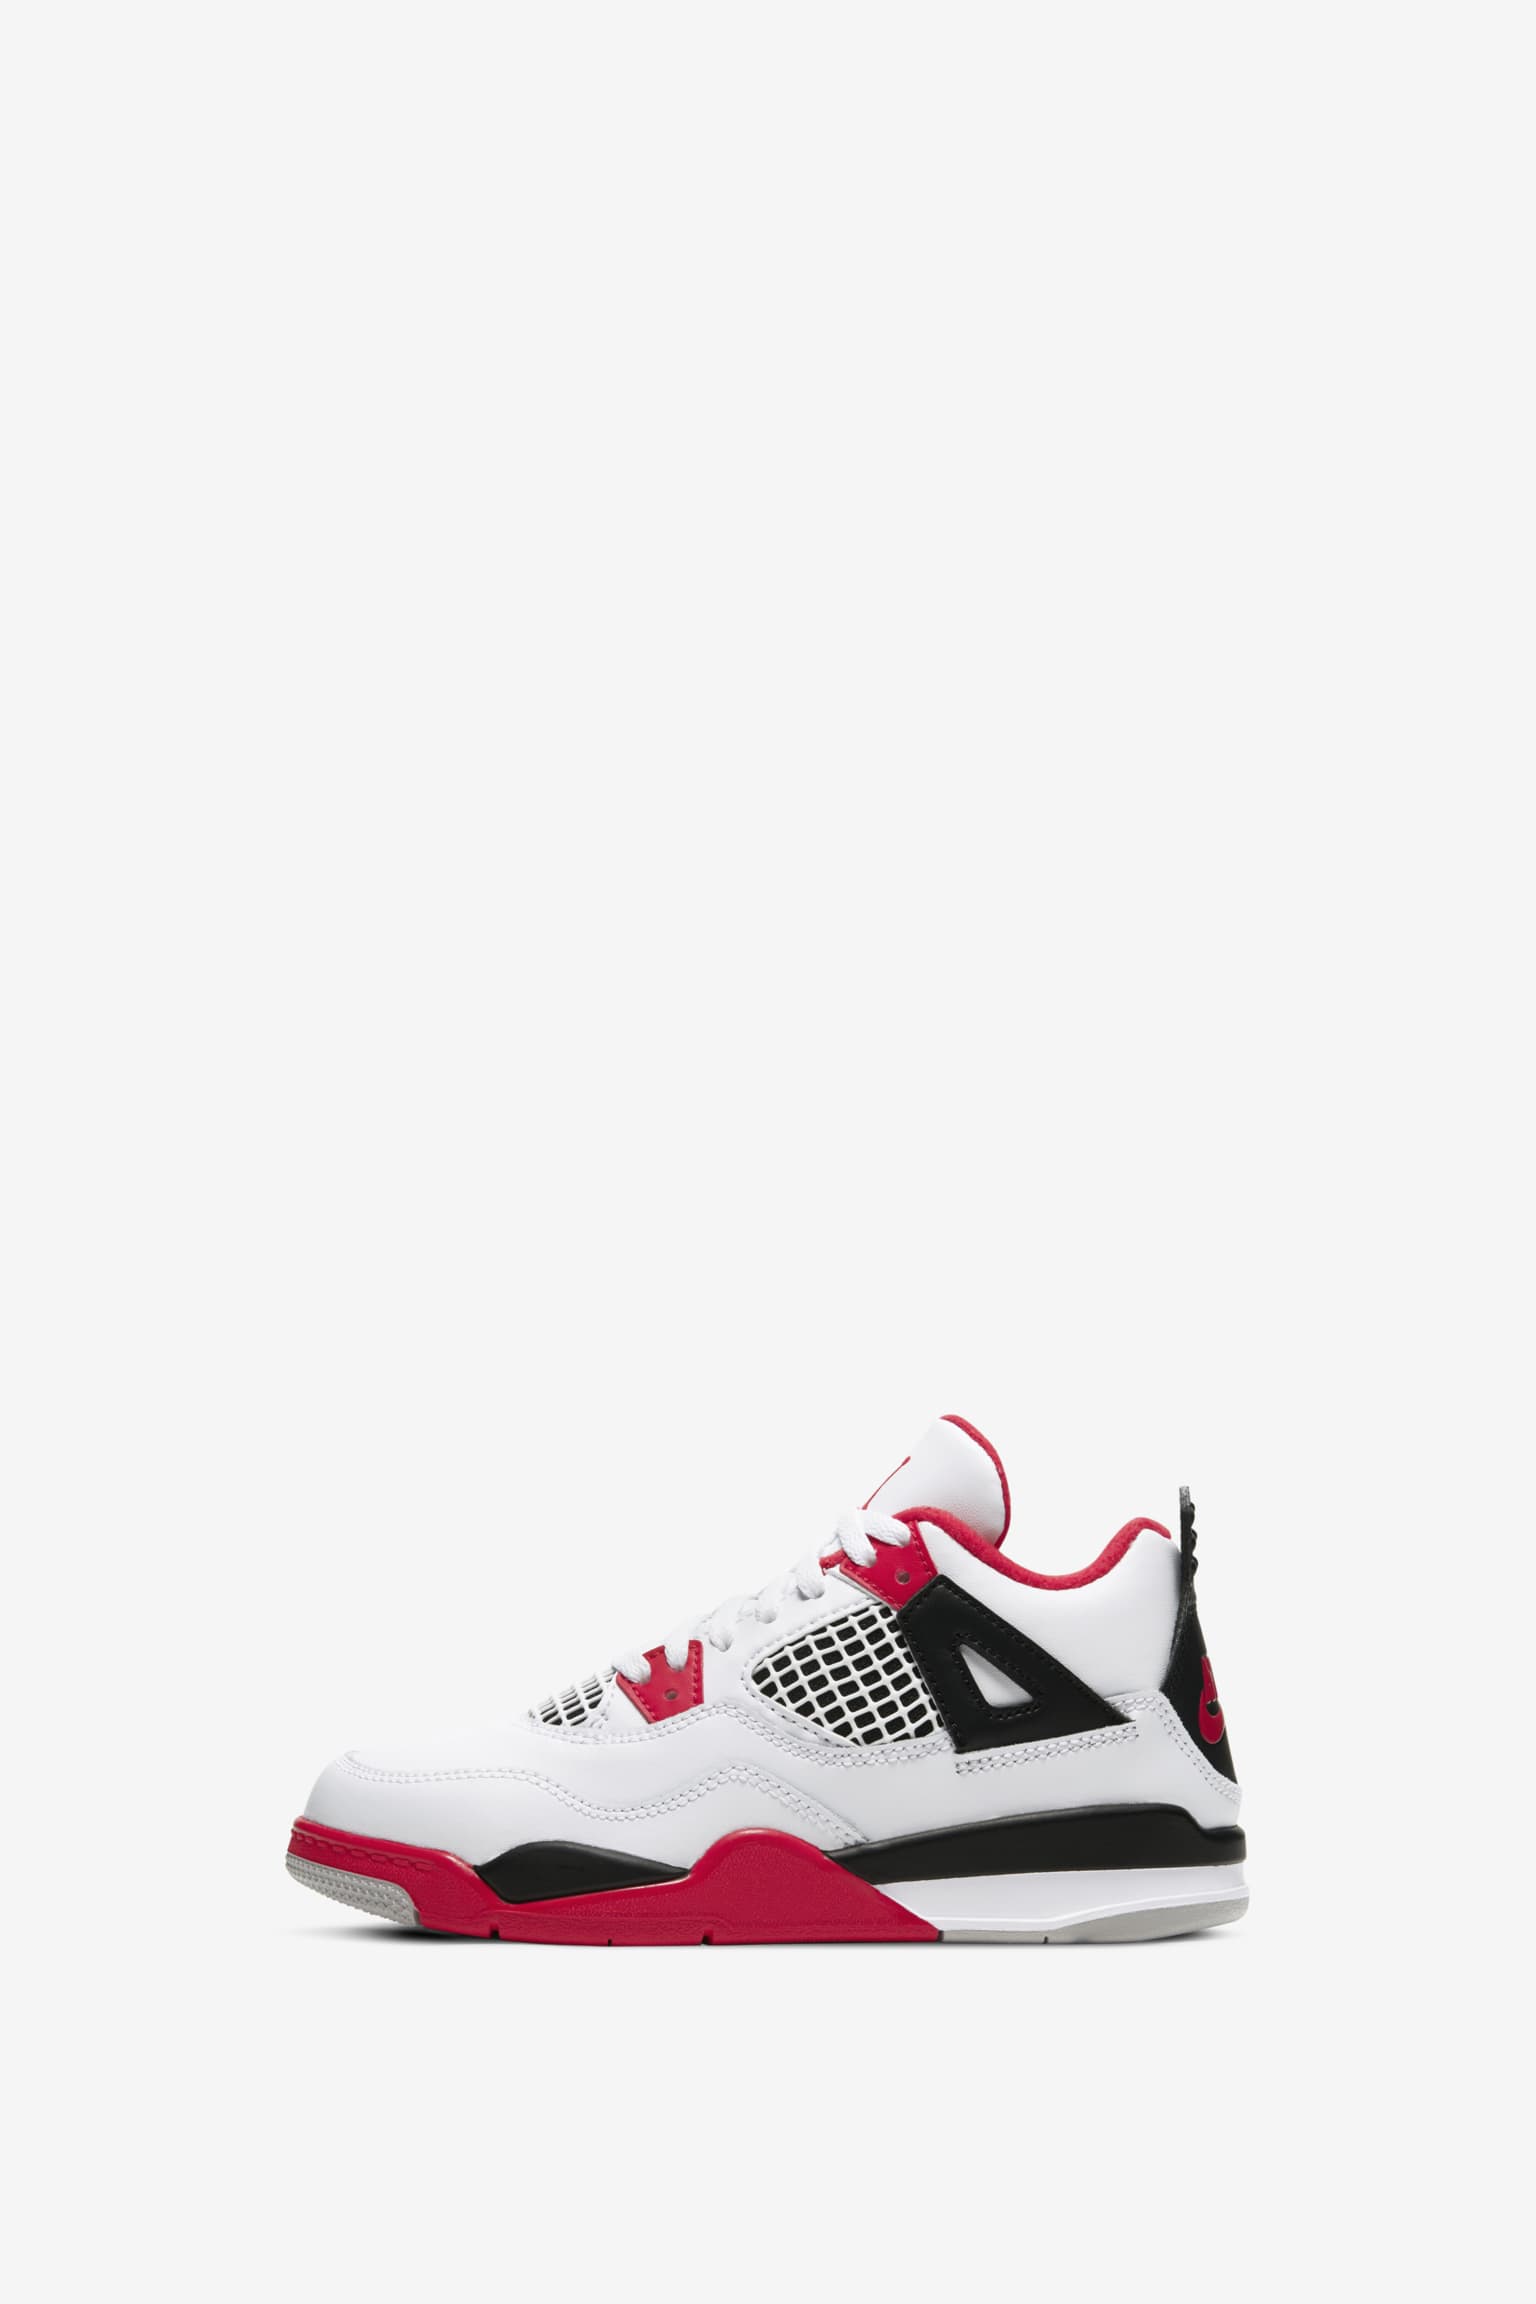 fire red 4s